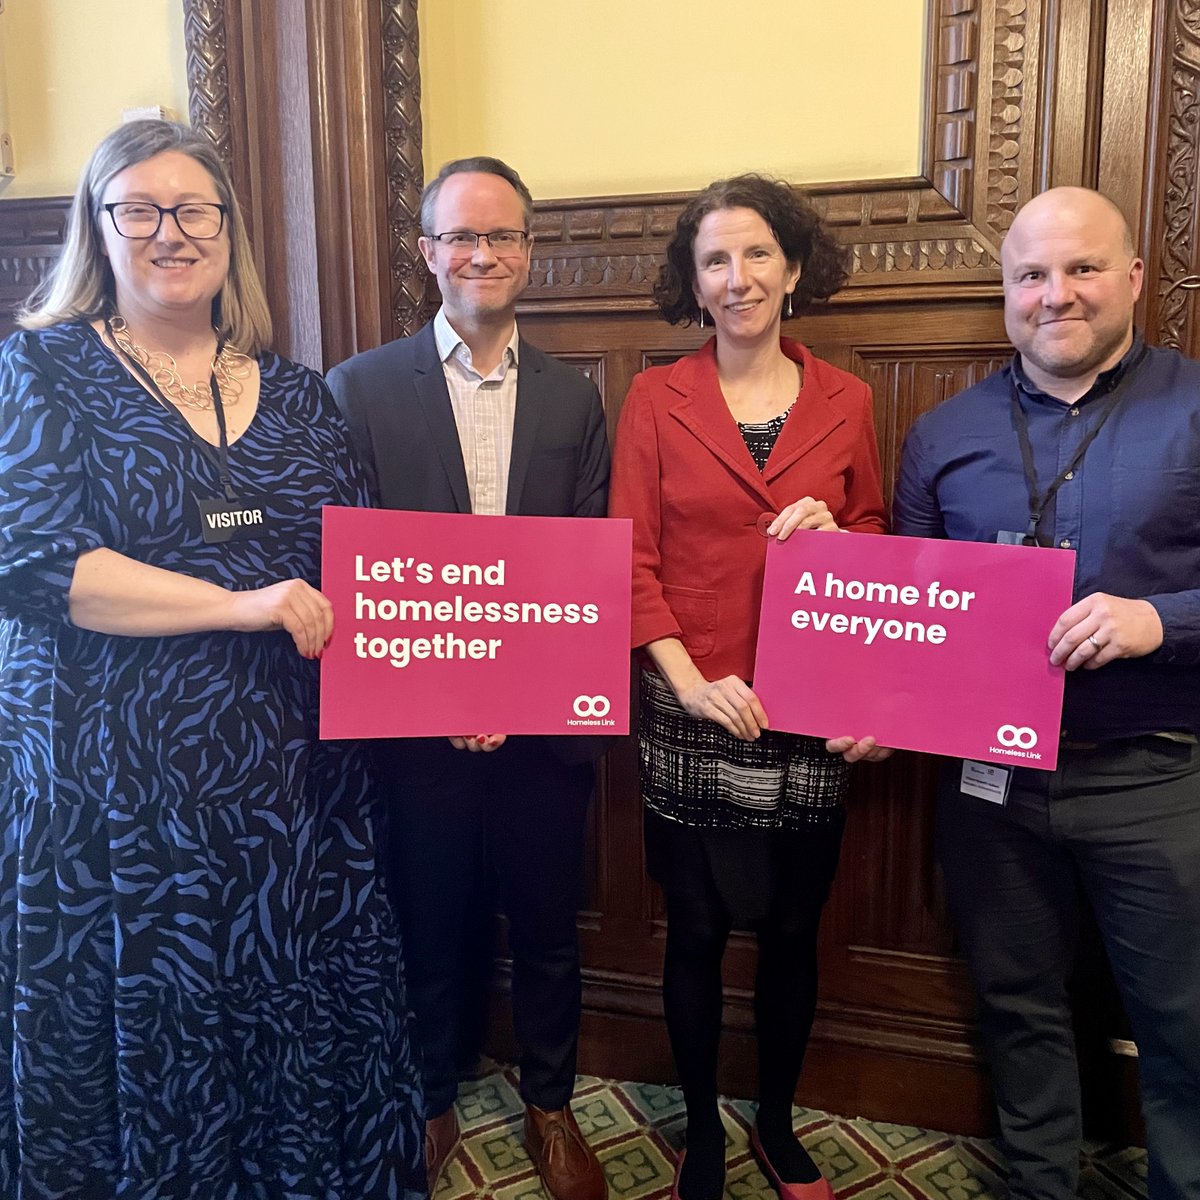 A productive day at Westminster at the @HomelessLink & @RiversideEHT lobby of Parliament. Thank you @AnnelieseDodds, @VictoriaPrentis and @david4wantage for meeting Homeless Oxfordshire, @aspireoxonline and @ConnectionSup. #EndingHomelessnessTogether